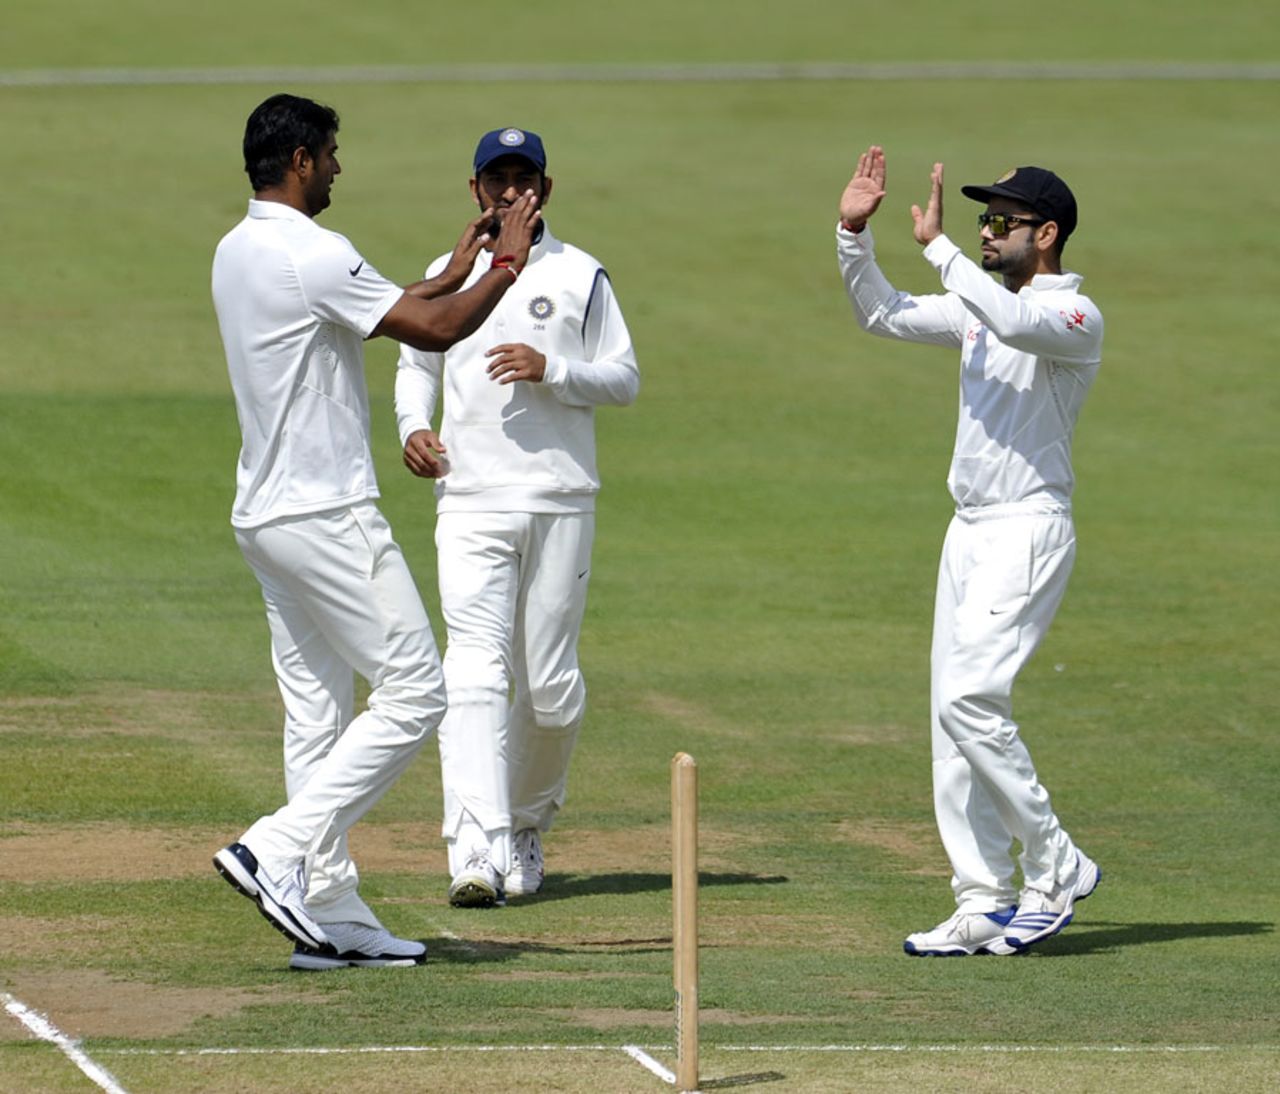 Pankaj Singh claimed an early wicket, Derbyshire v Indians, Tour match, Derby, 1st day, July 1, 2014